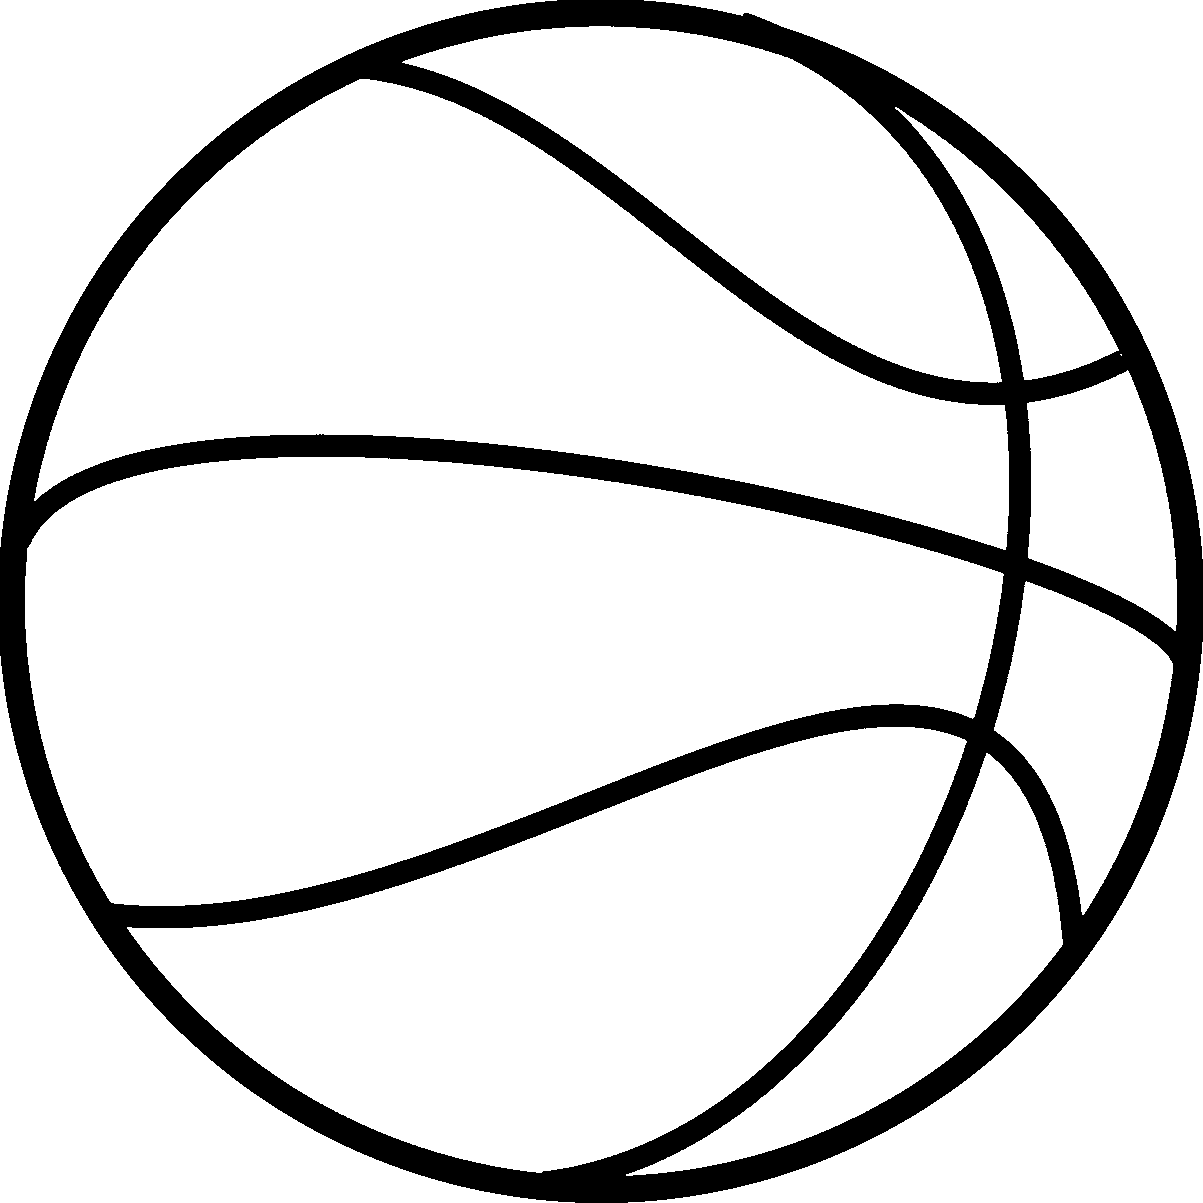 Ball Coloring Page - AZ Coloring Pages